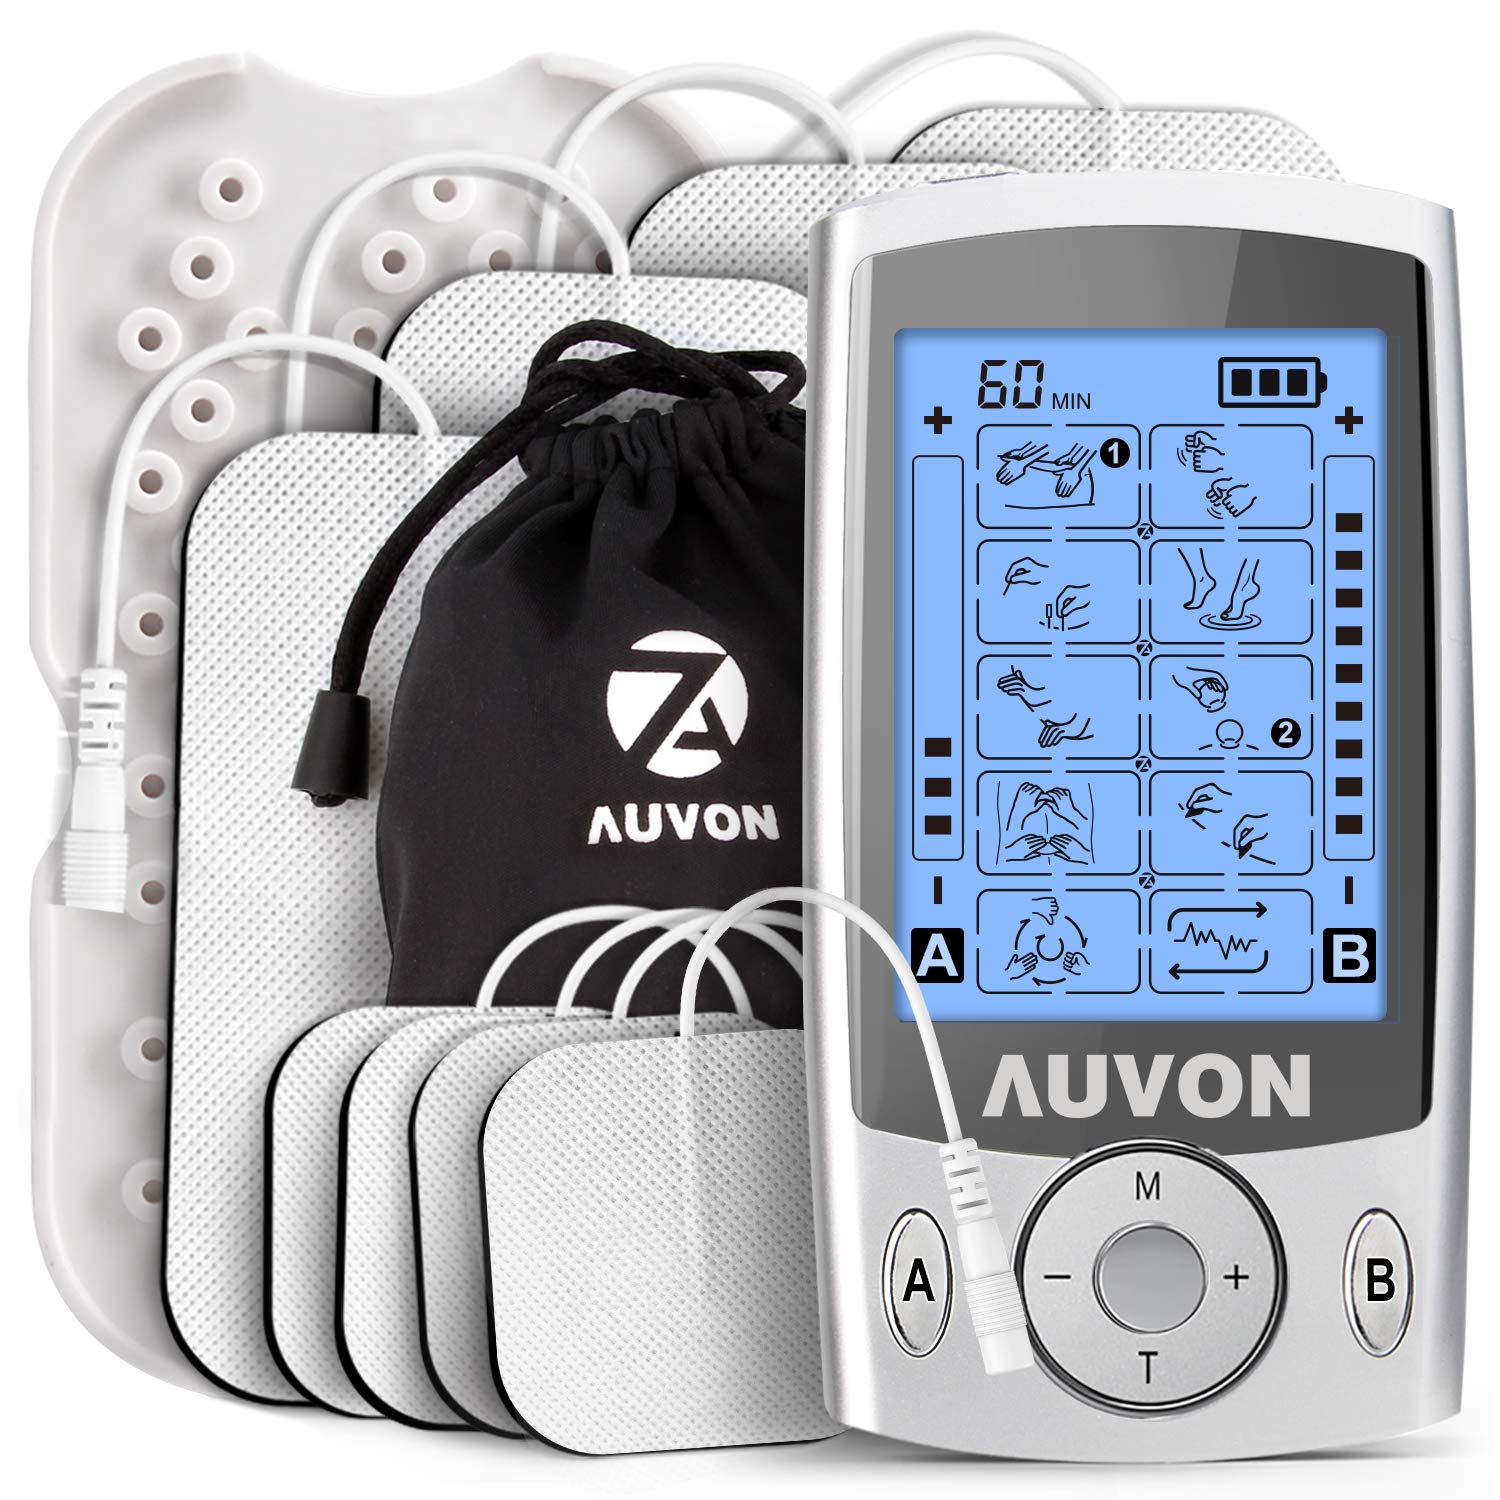 AUVON Touchscreen TENS Unit  Our Point Of View 